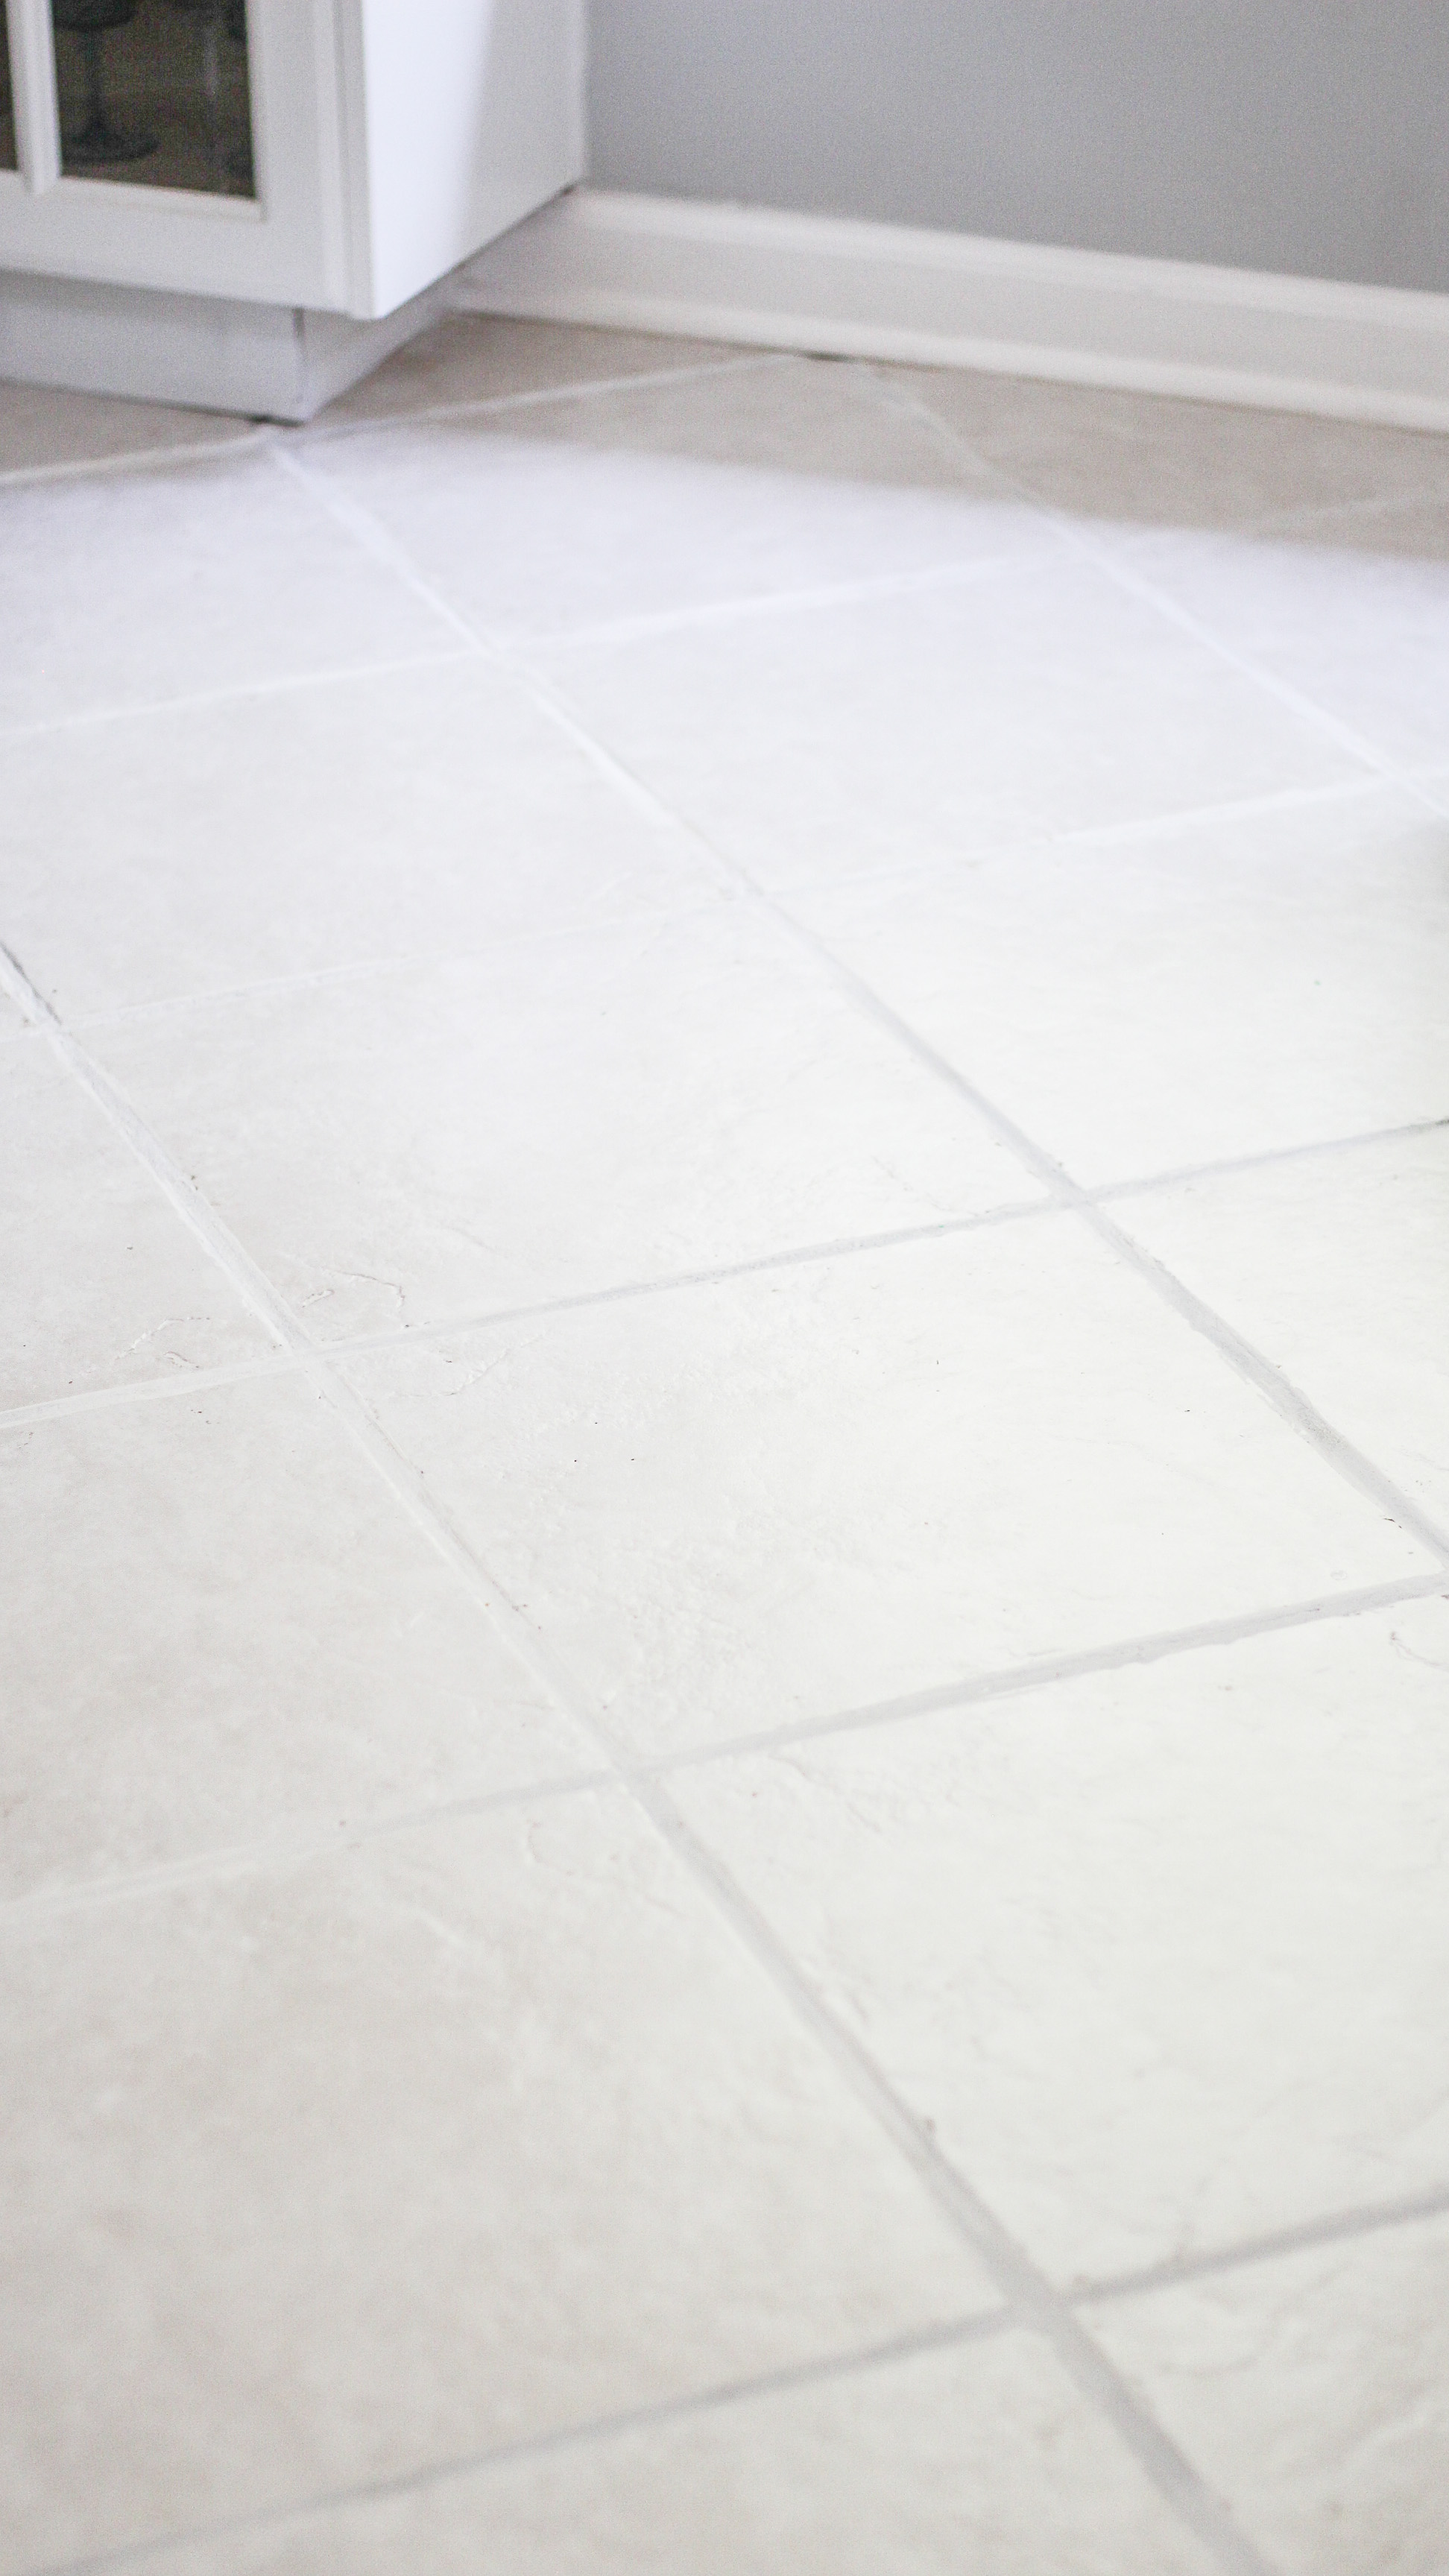 Neglected Tile Flooring, How To Wash Ceramic Tile Floors